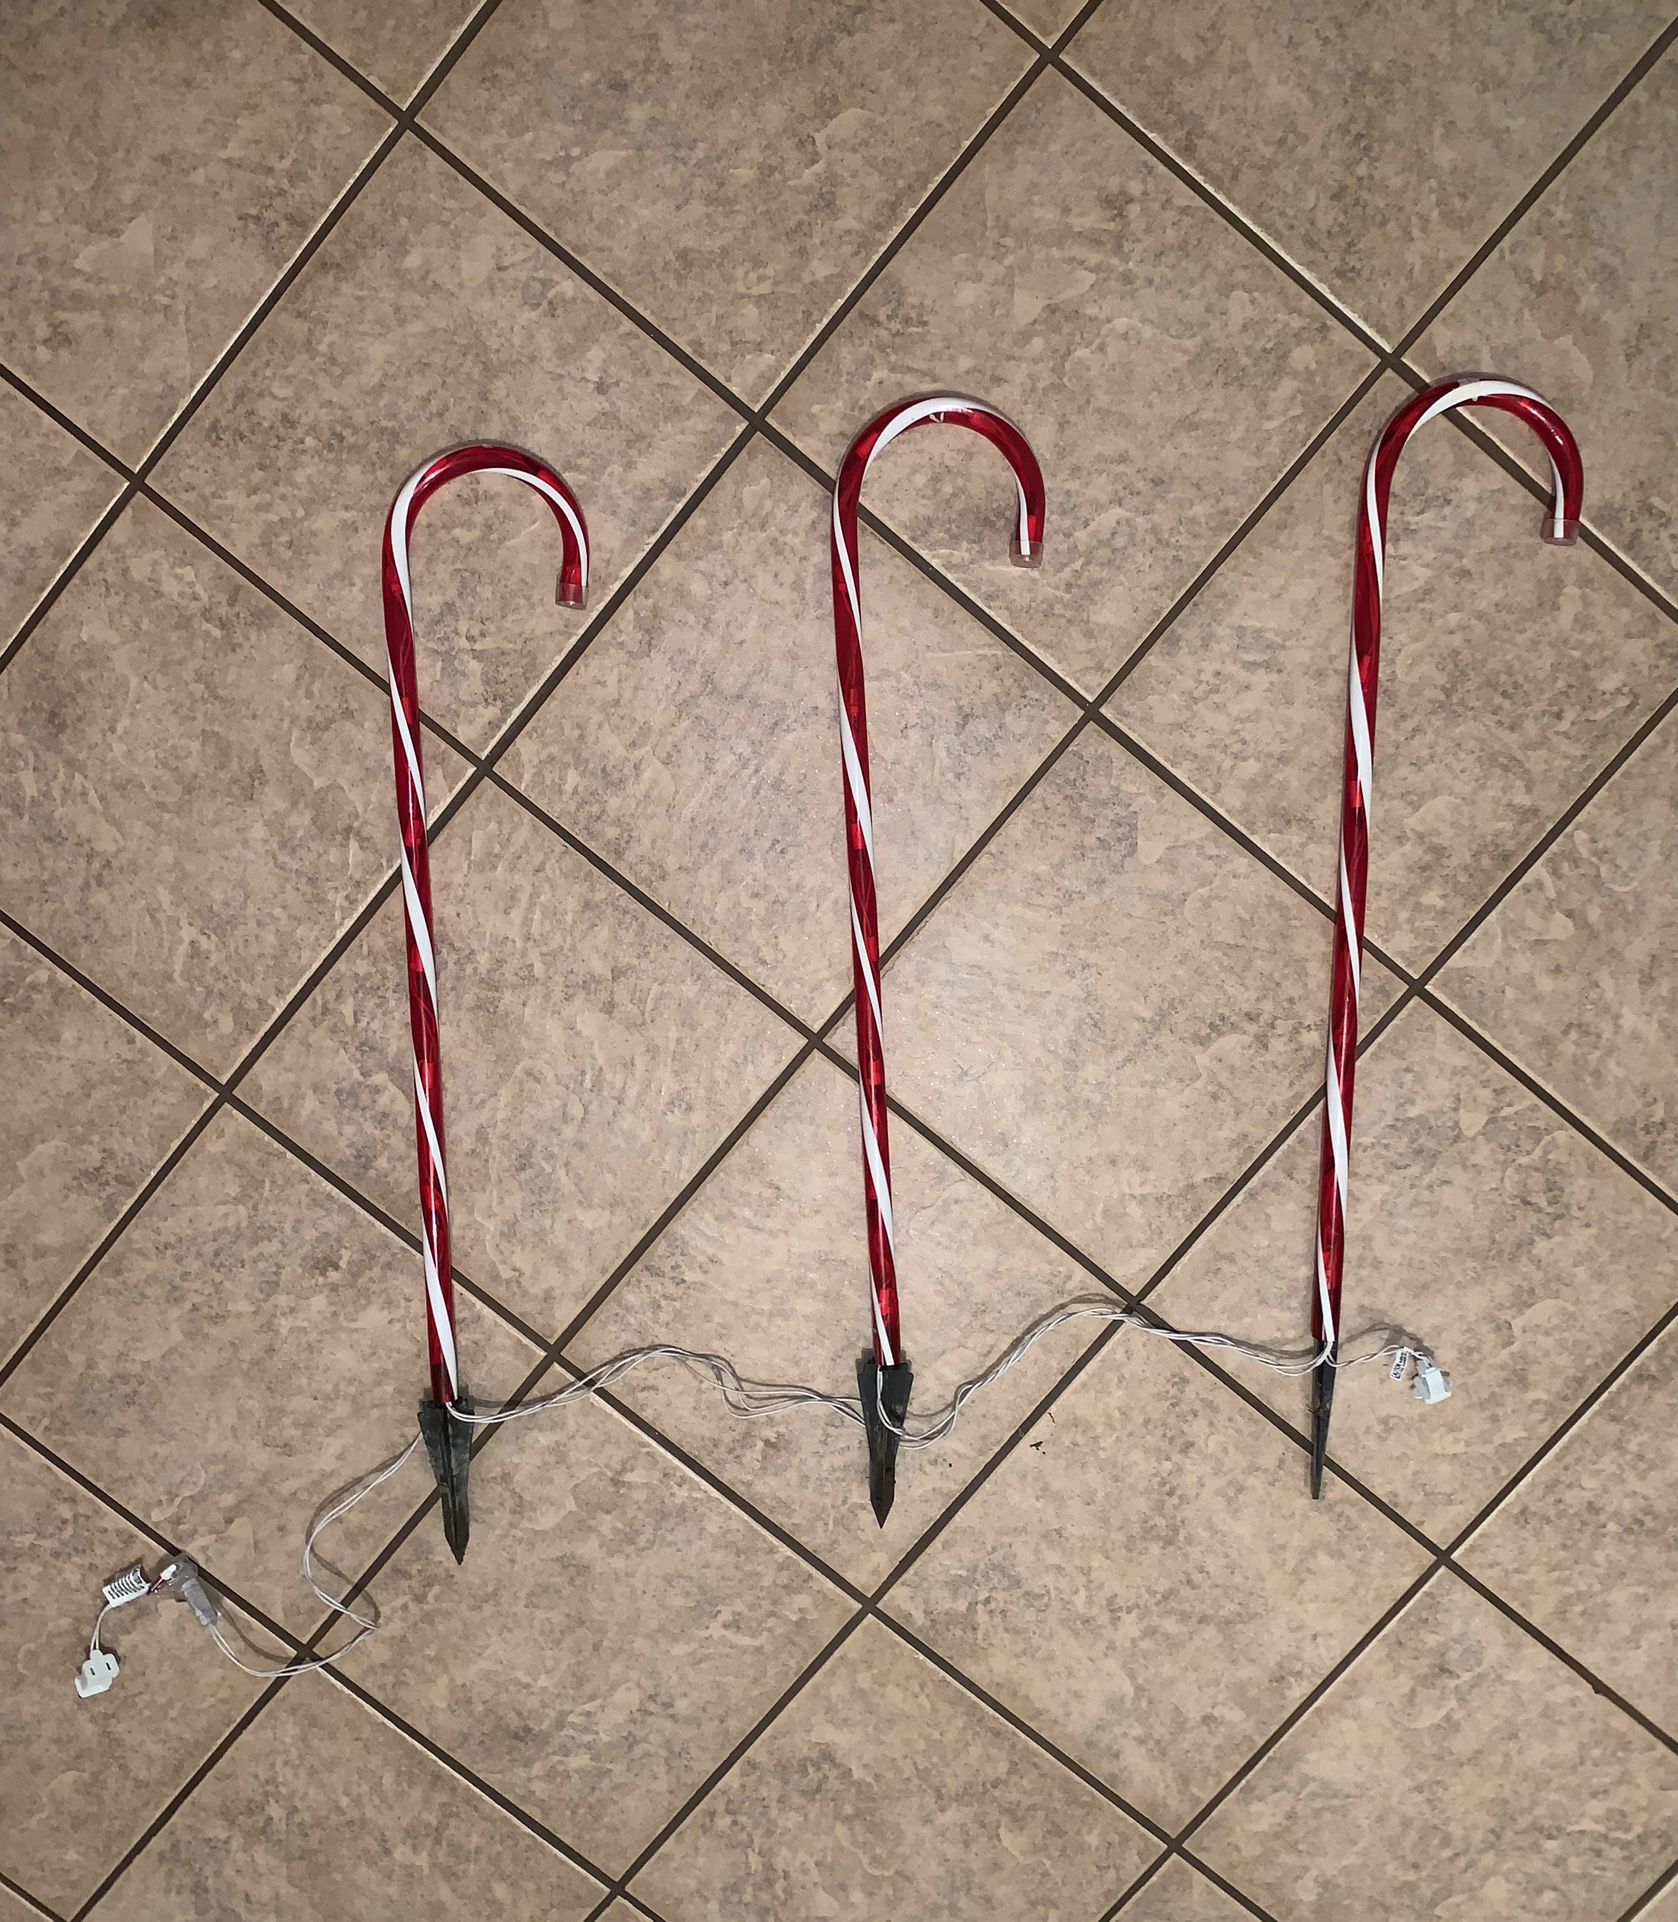 Sting Lights of 3 Candy Canes Christmas Outdoor Decorations